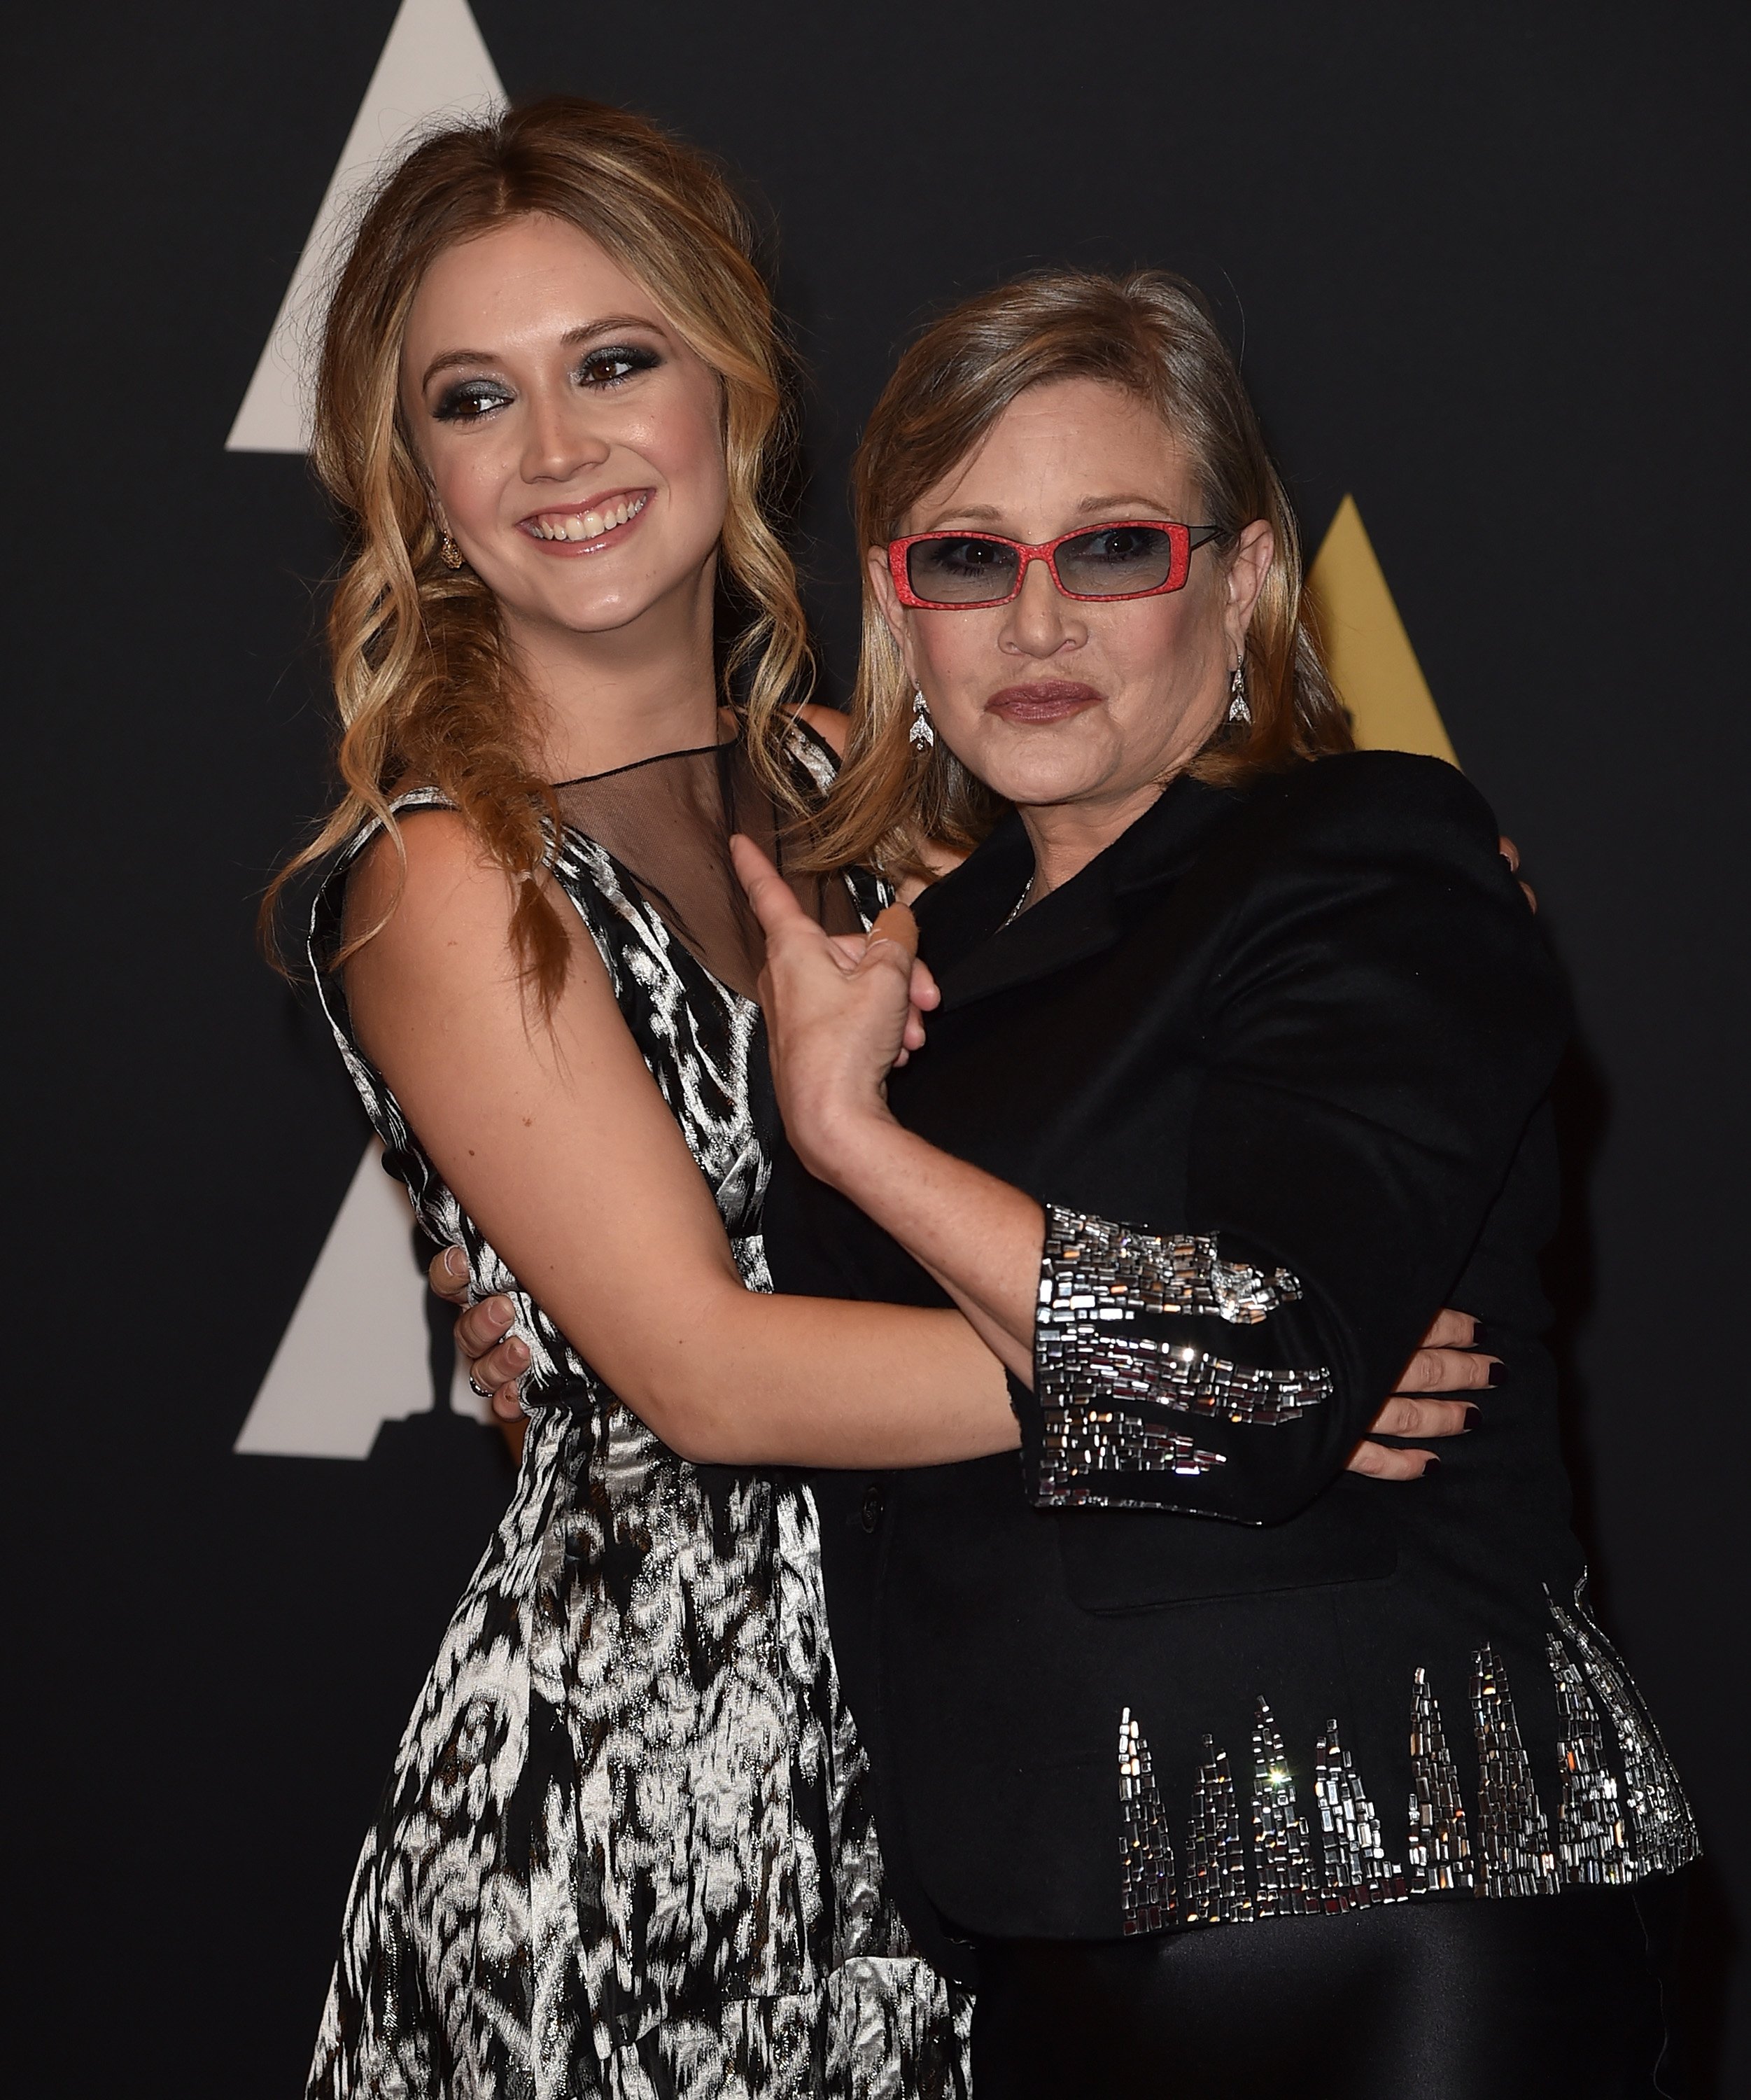 Billie Lourd and Carrie Fisher attend the Annual Governors Awards in Hollywood on November 14, 2015 | Photo: Getty Images